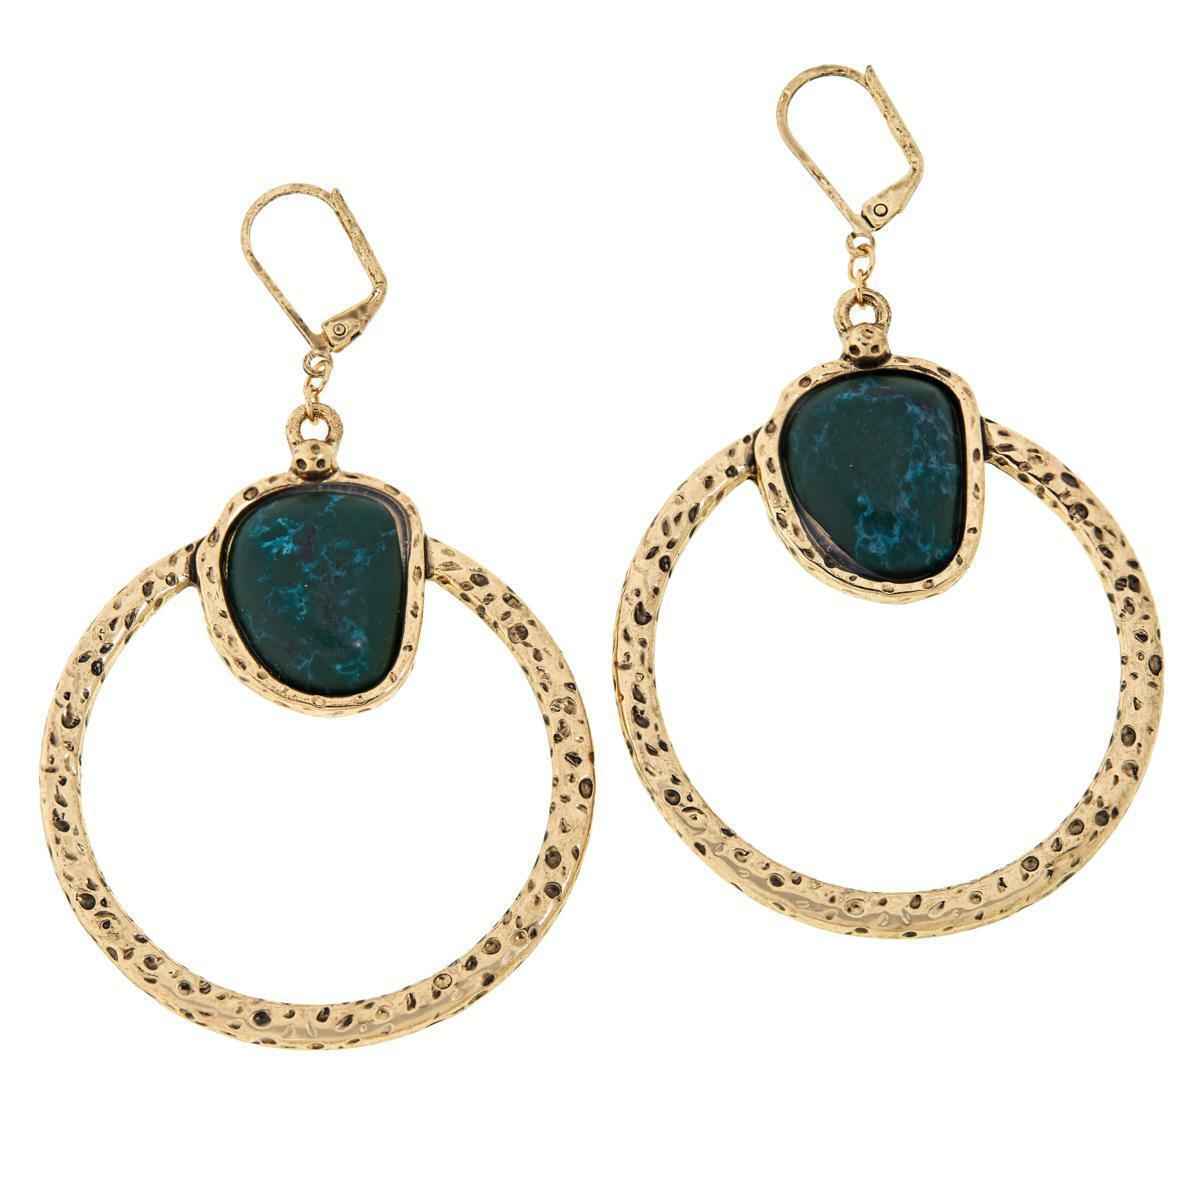 Magnificent Magnifiers Simulated Malachite Gemstone Drop 3" Earrings